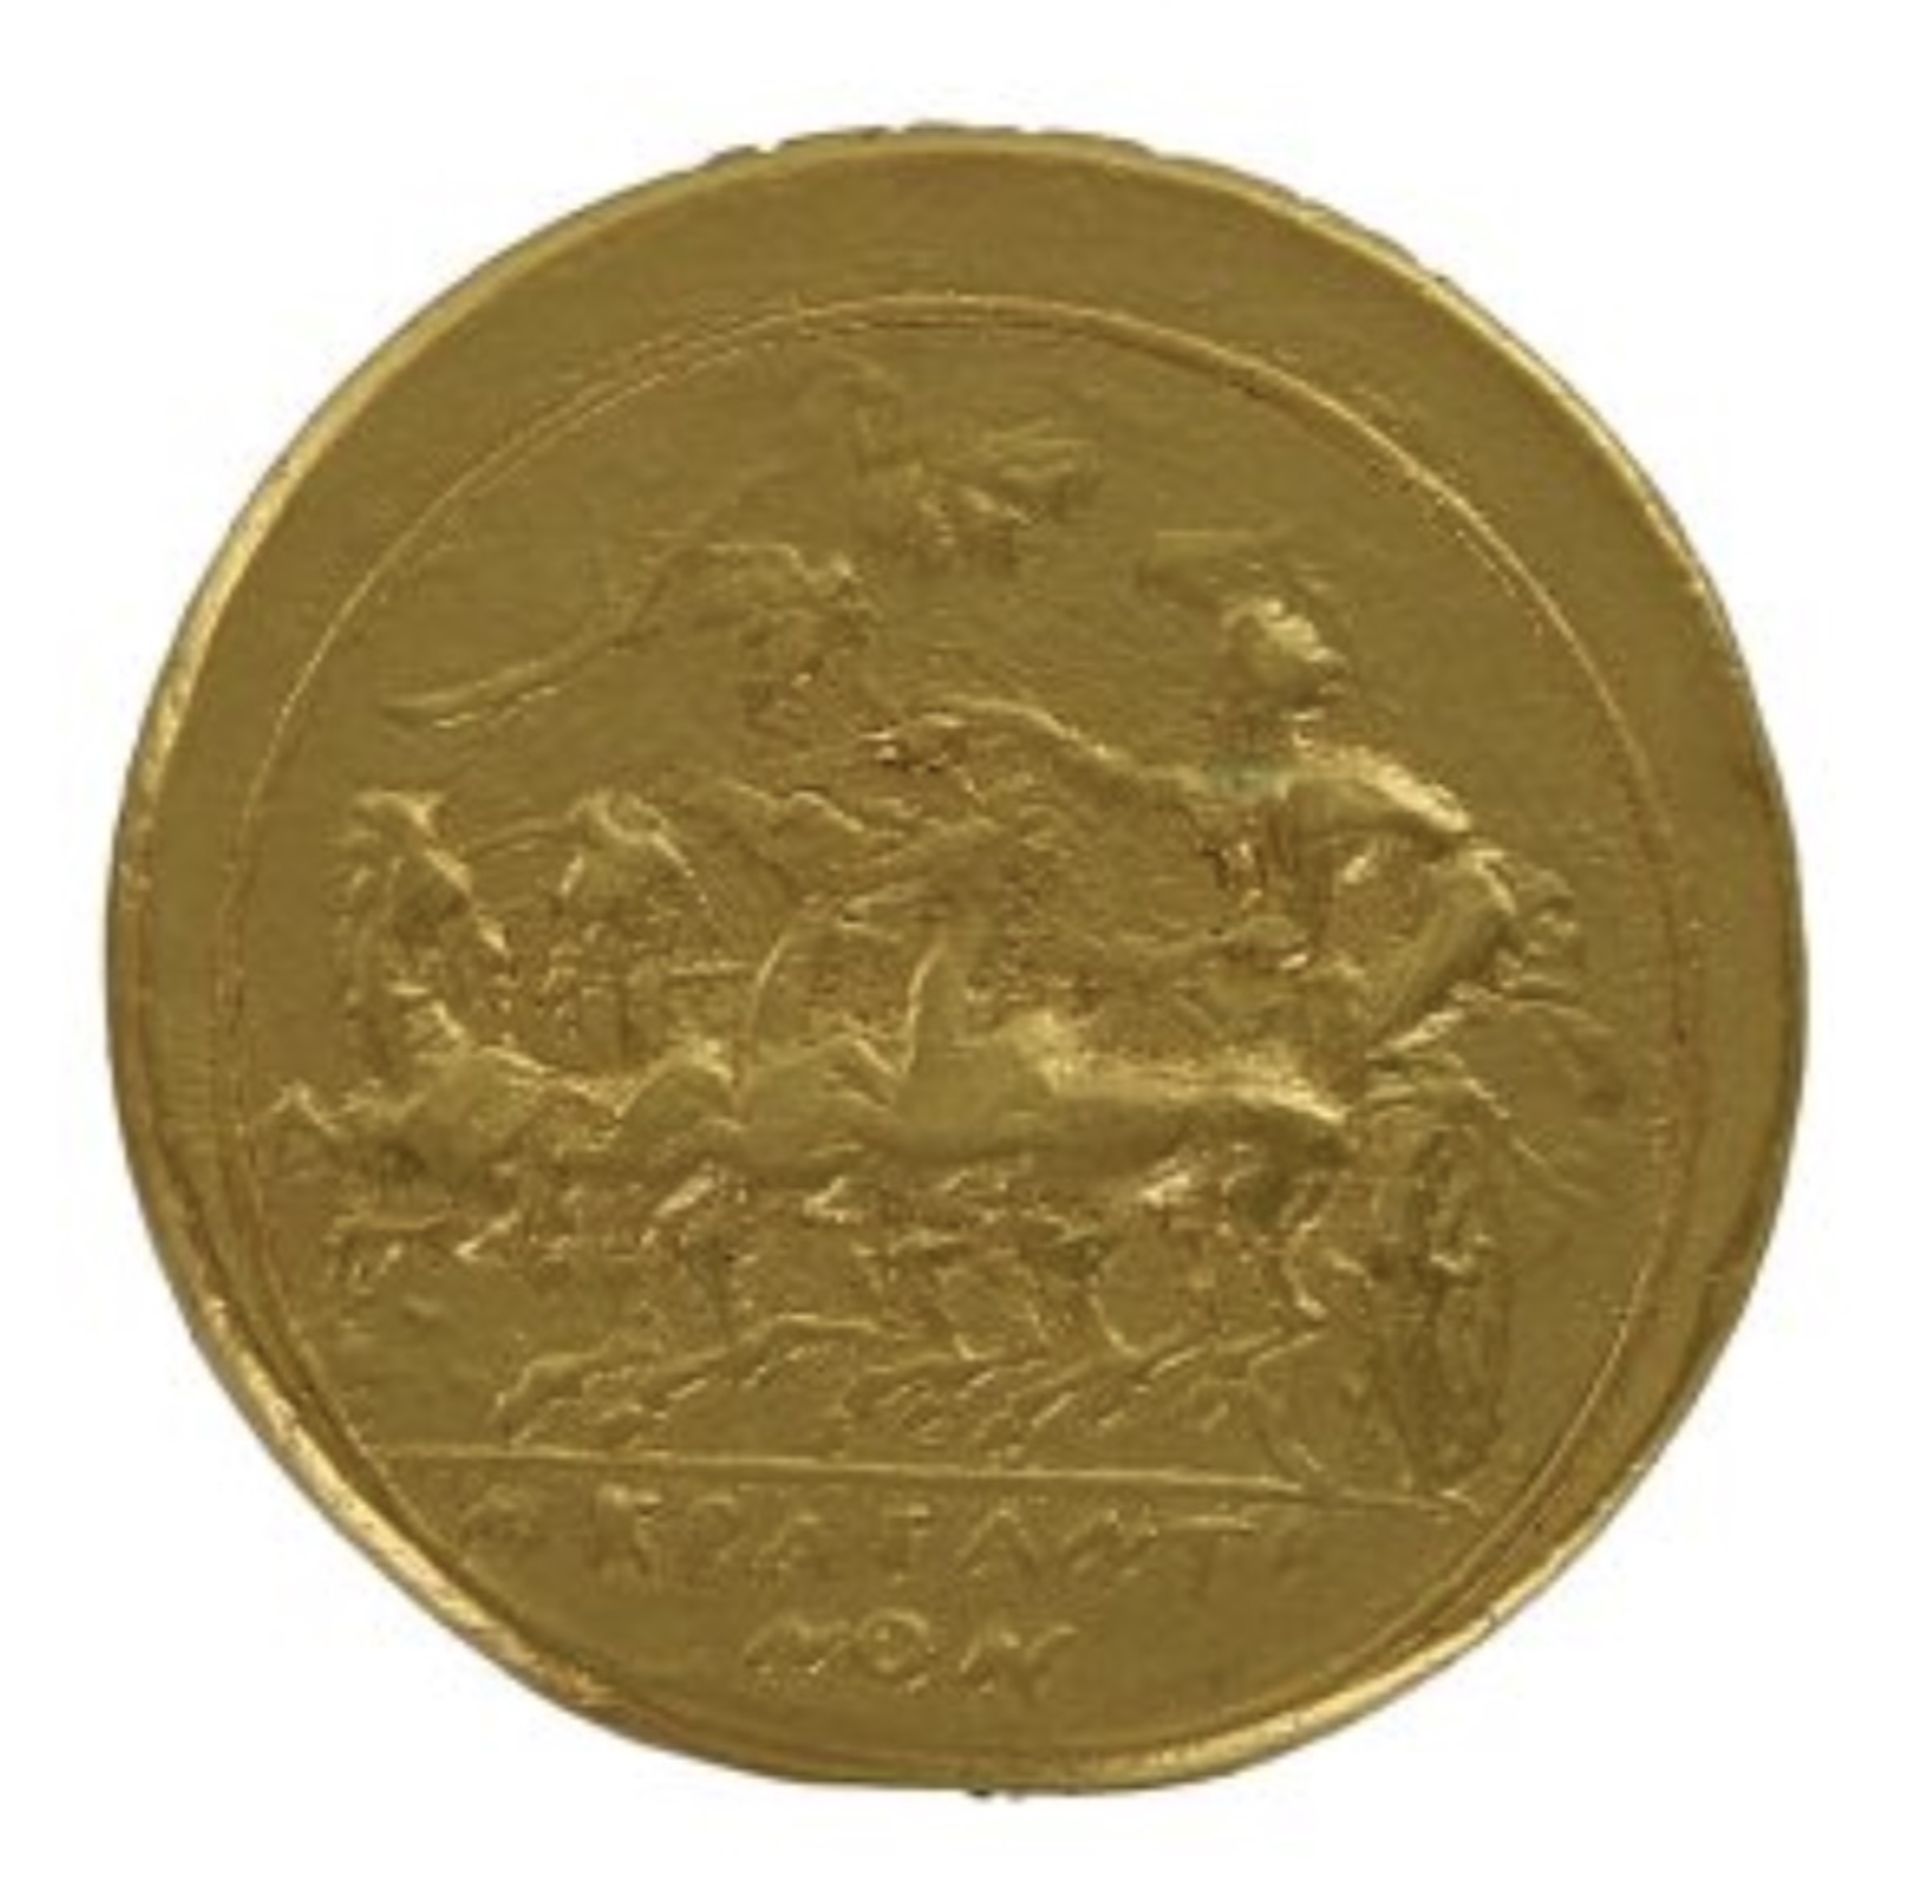 Agrigentum, Sicily, 24K Gold Plated Tetradrachm Coin - Image 2 of 2